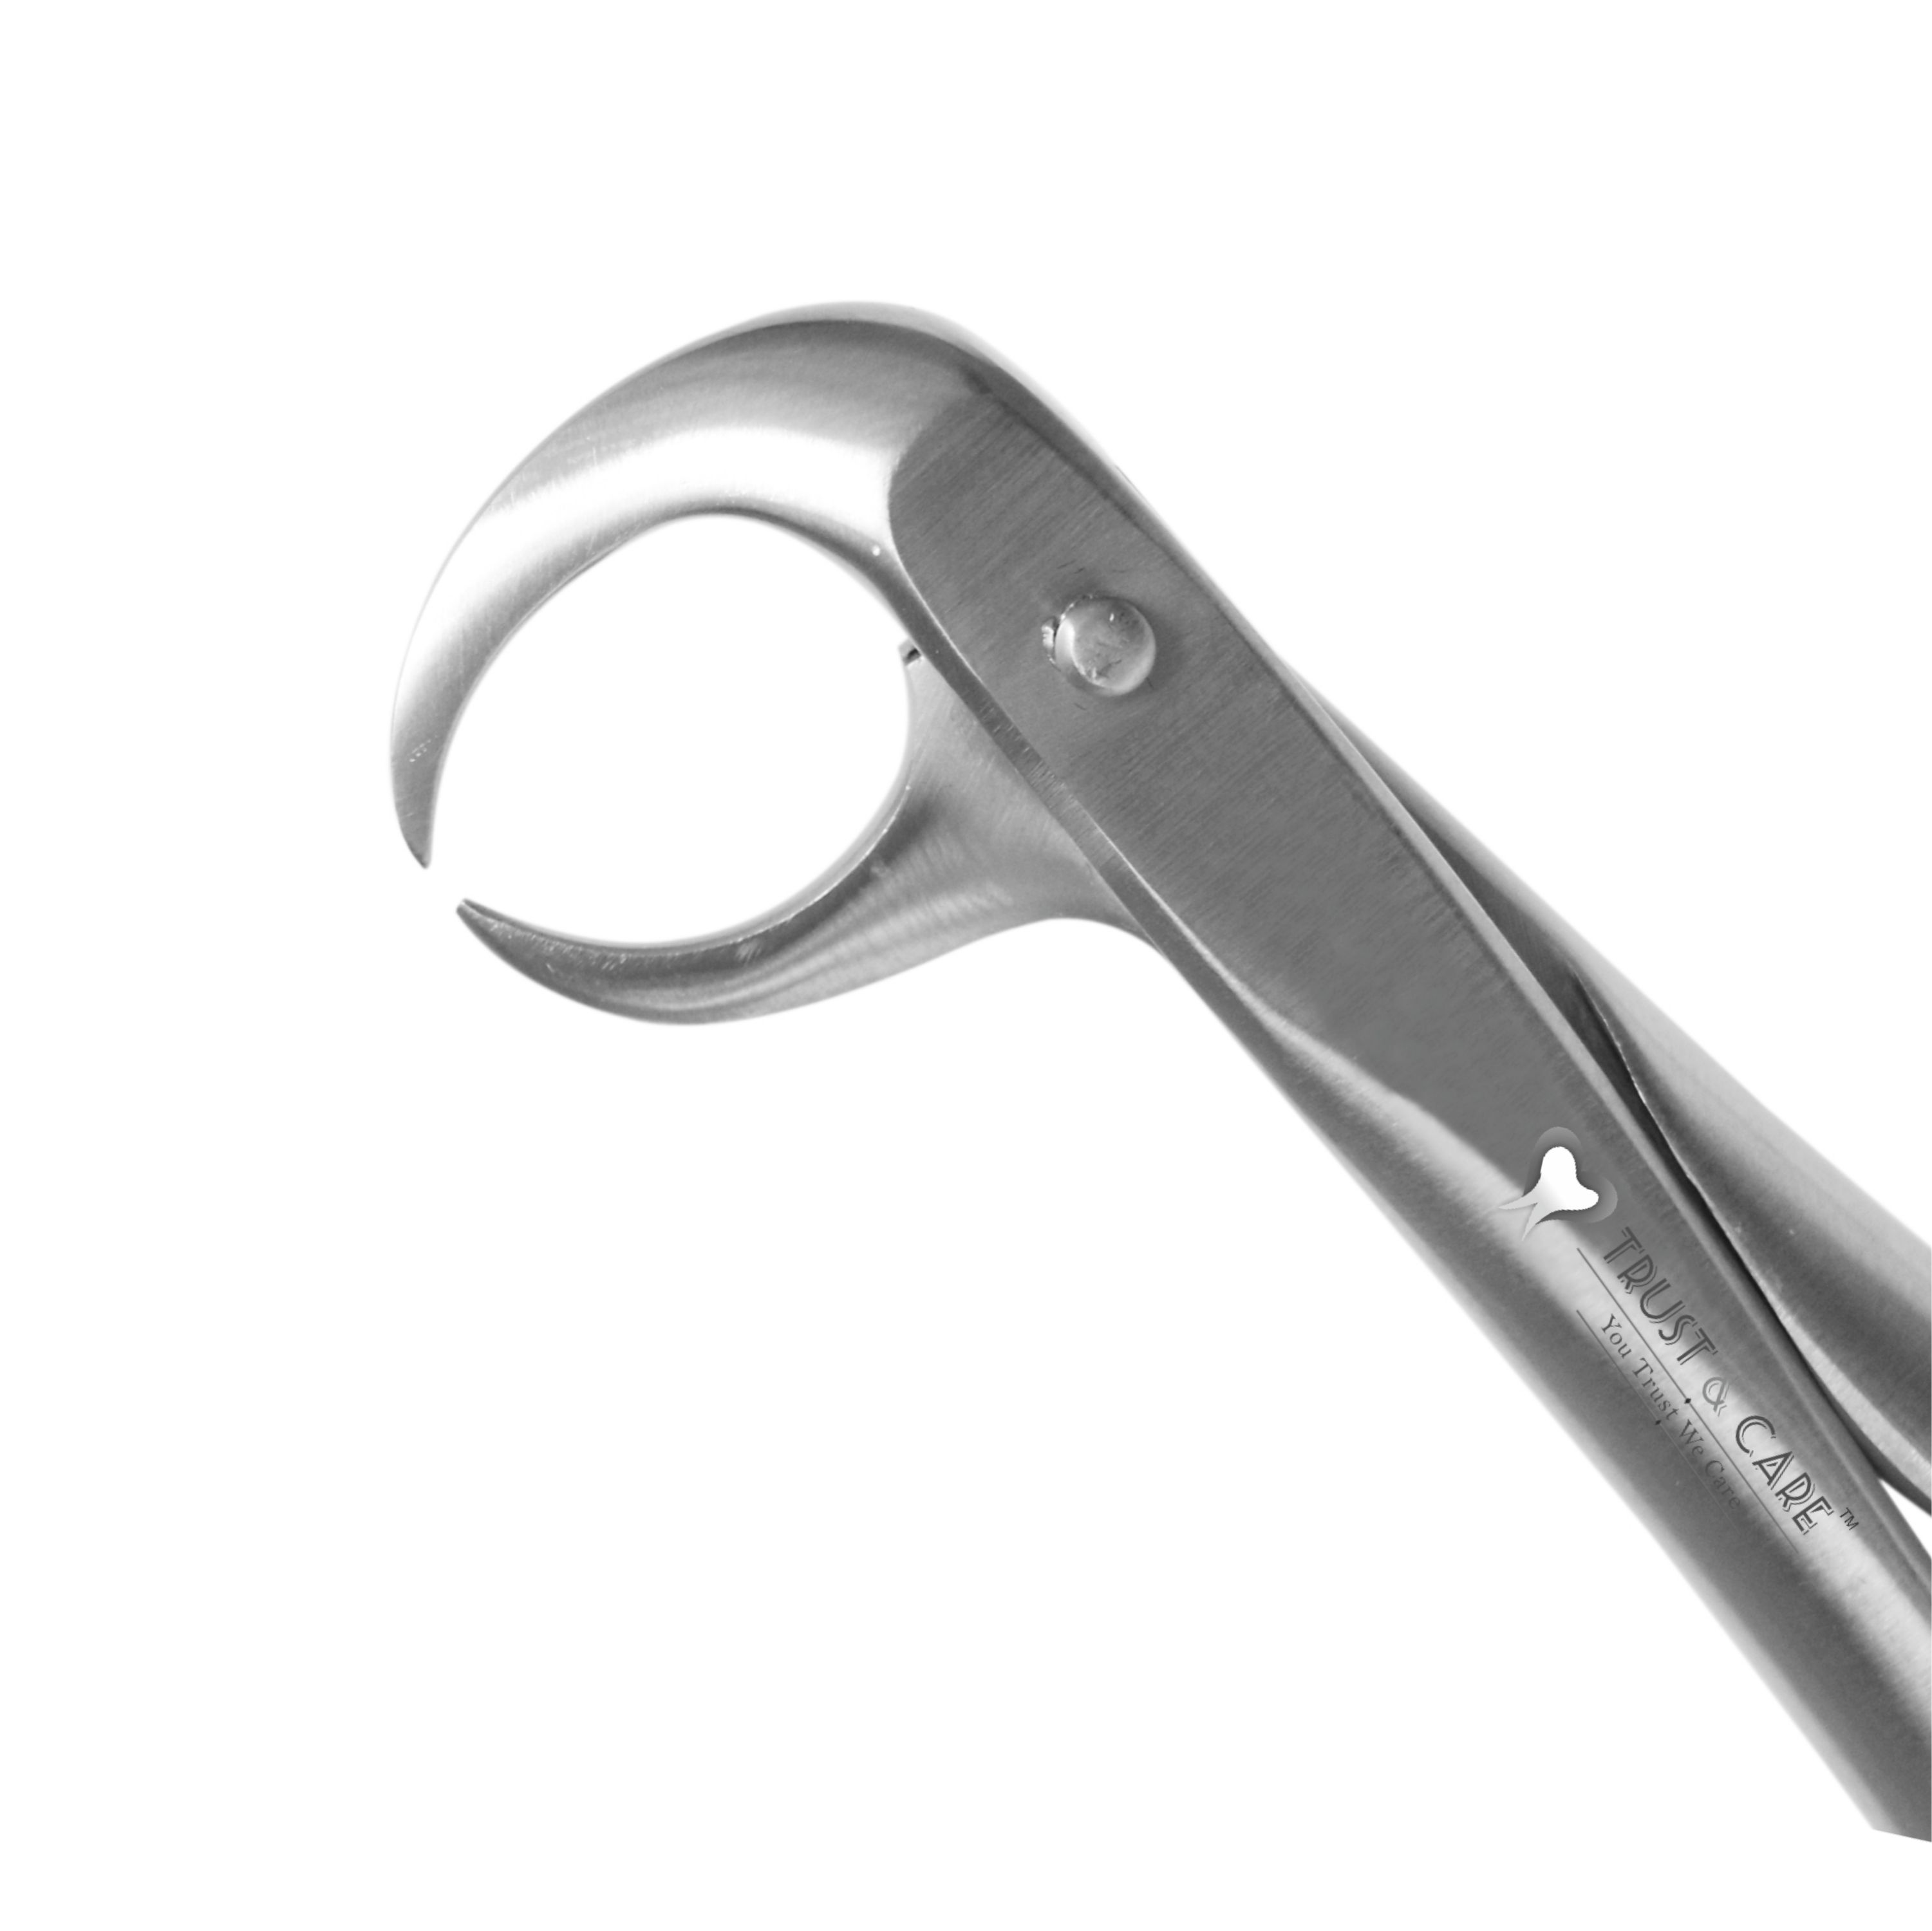 Trust & Care Tooth Extraction Forcep Lower Molars Cow Horn Fig No. 86 Standard